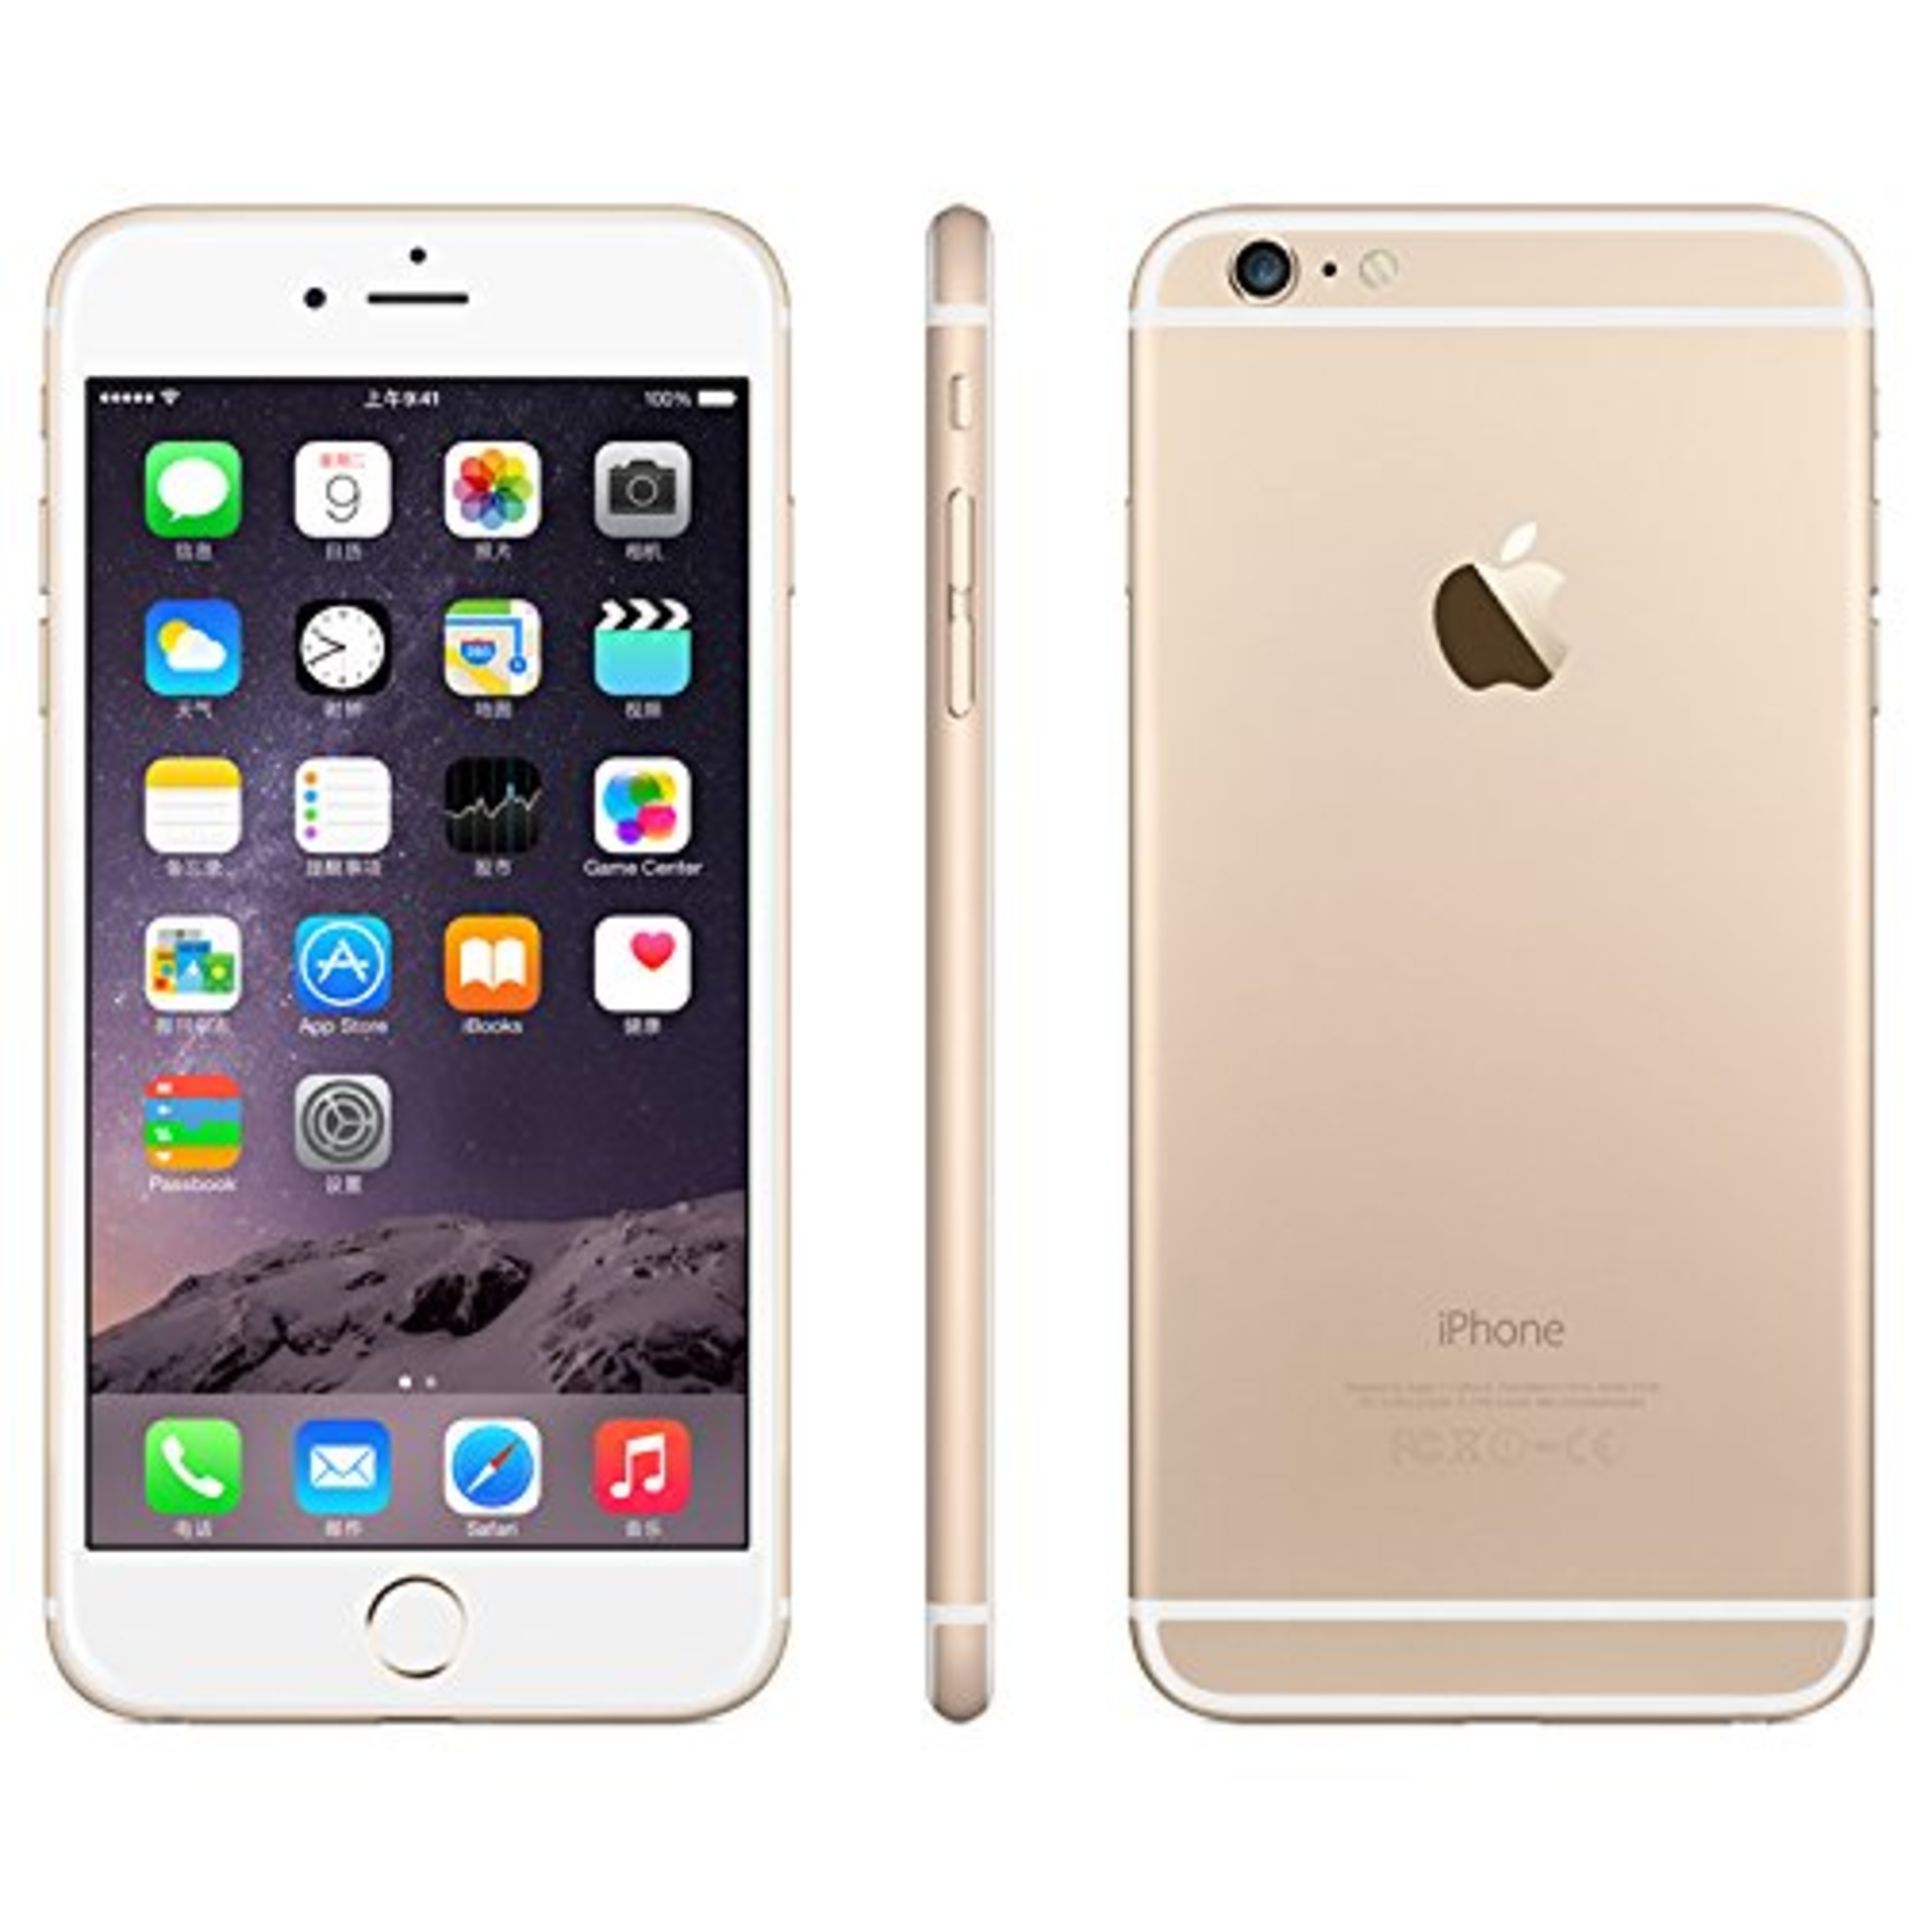 Grade A Apple iphone 6 plus 16GB Colours May Vary Touch ID Item available approx 10 working days